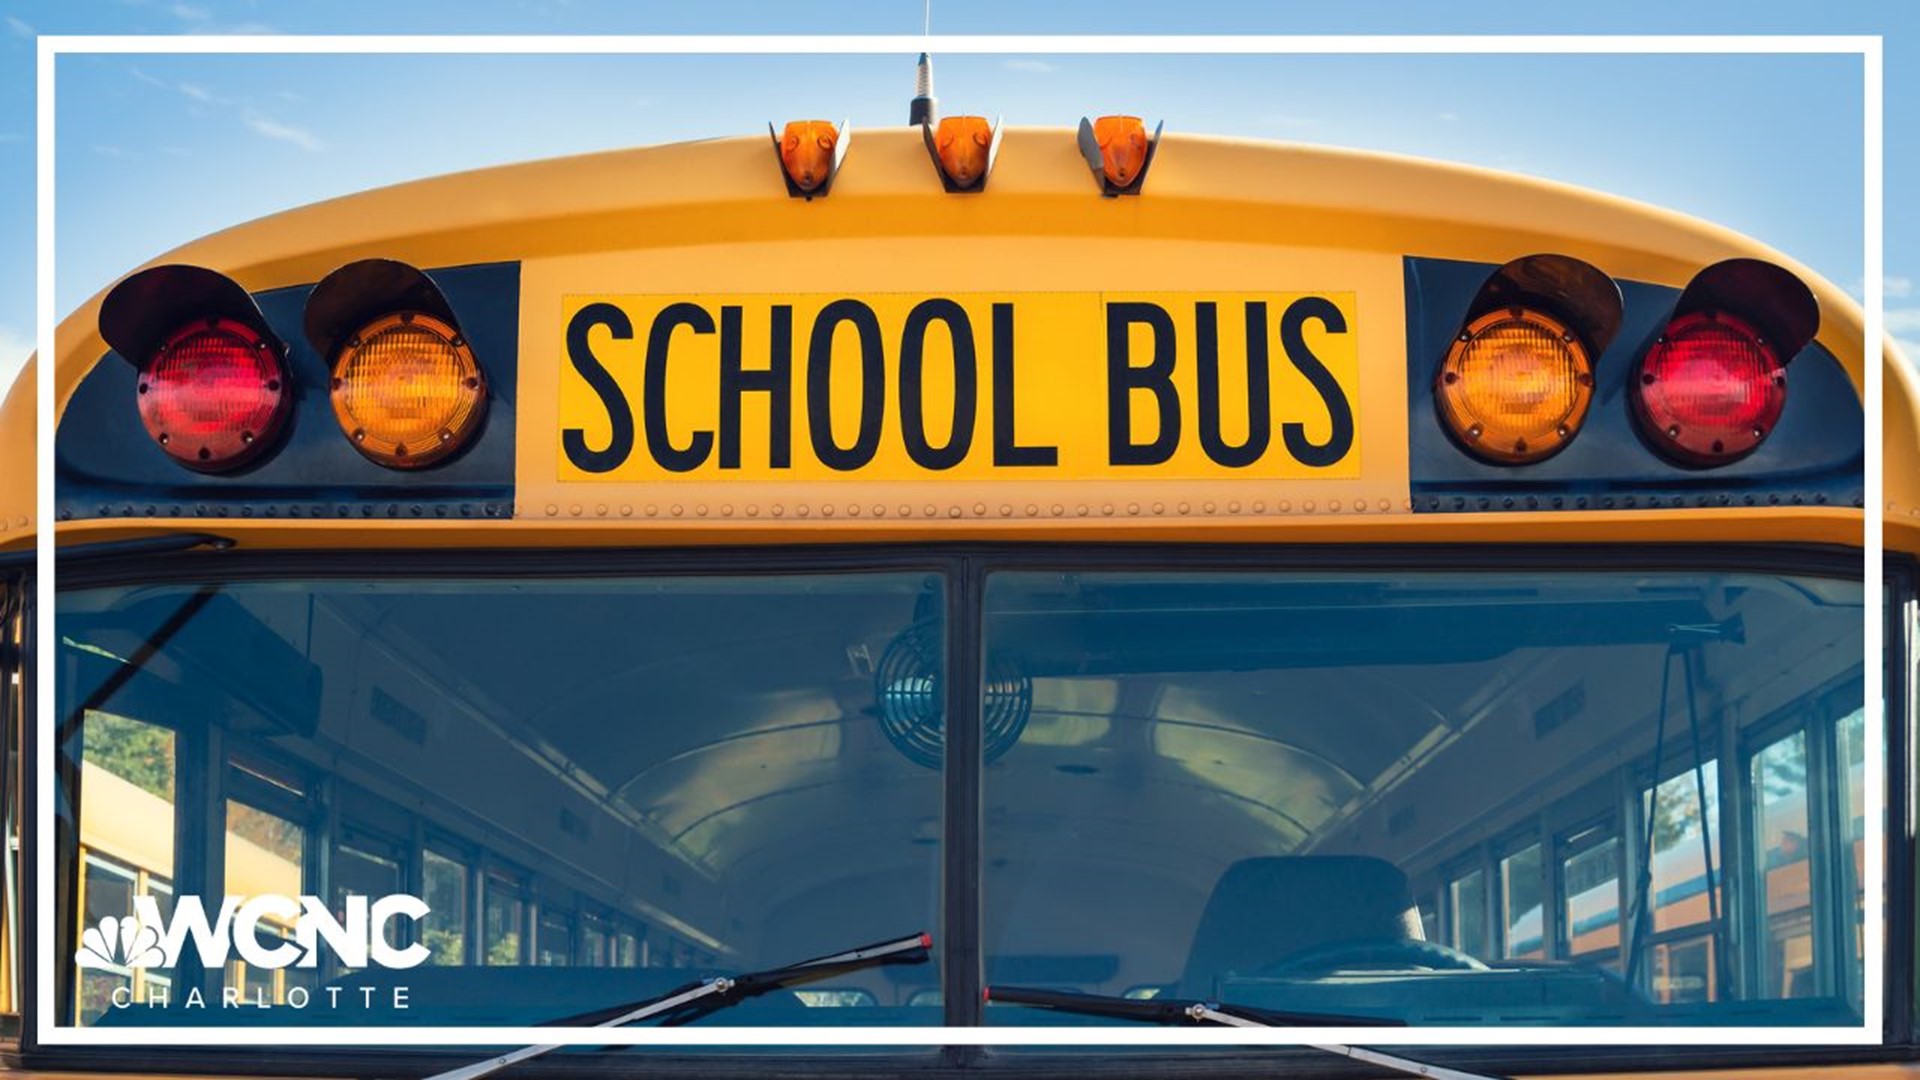 A school bus driver was hit by a student while trying to break up a fight this week in Salisbury, according to the Rowan County Sheriff's Office.